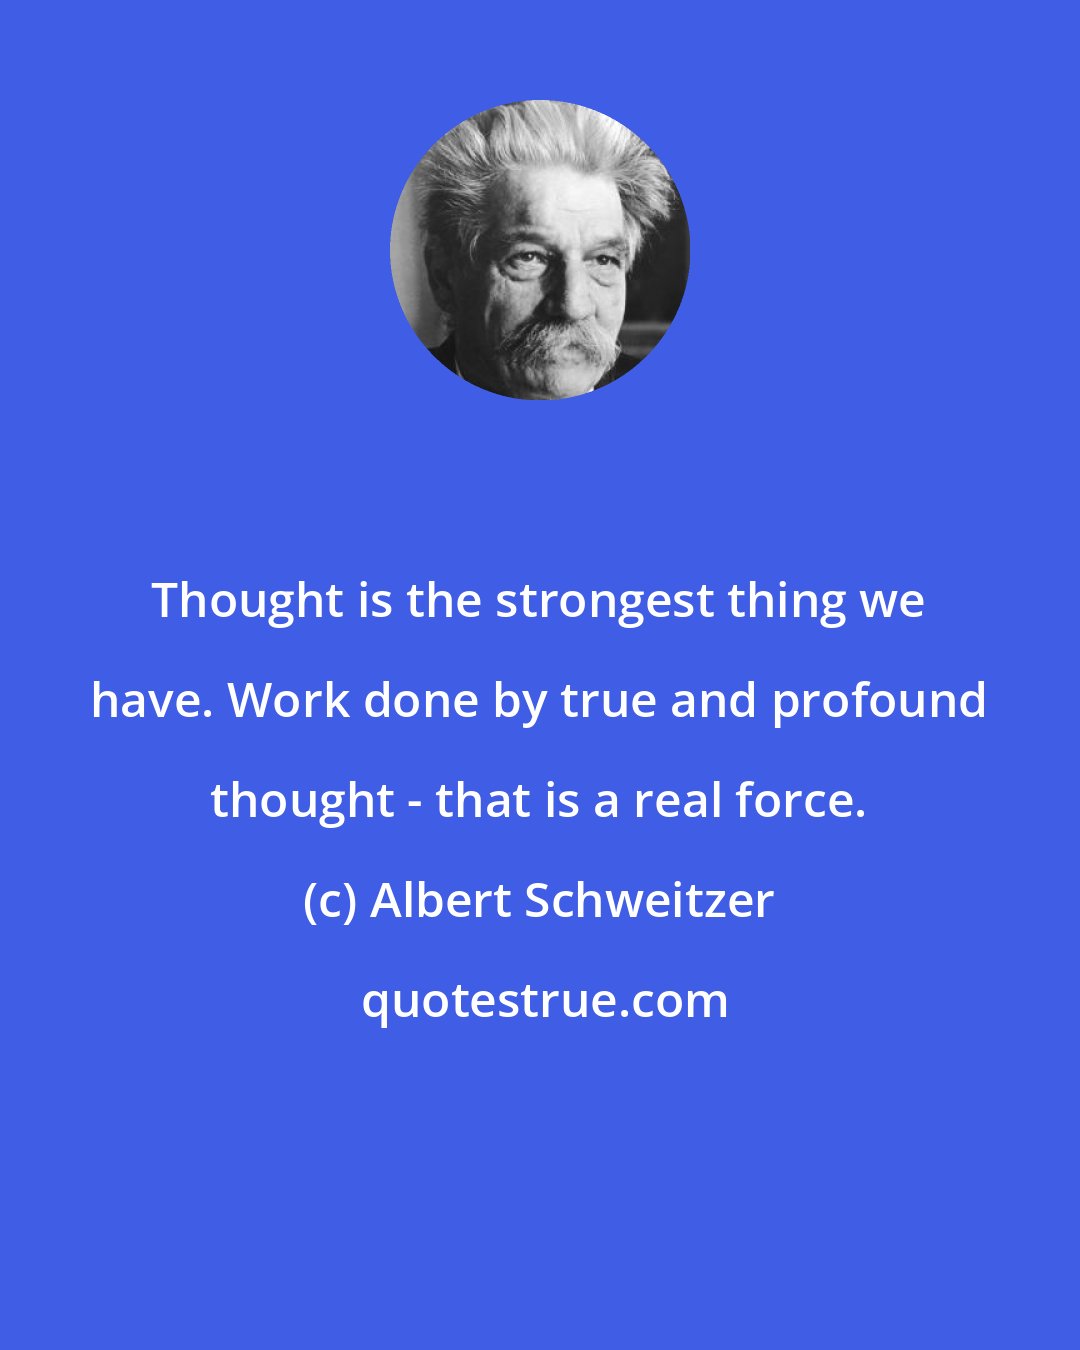 Albert Schweitzer: Thought is the strongest thing we have. Work done by true and profound thought - that is a real force.